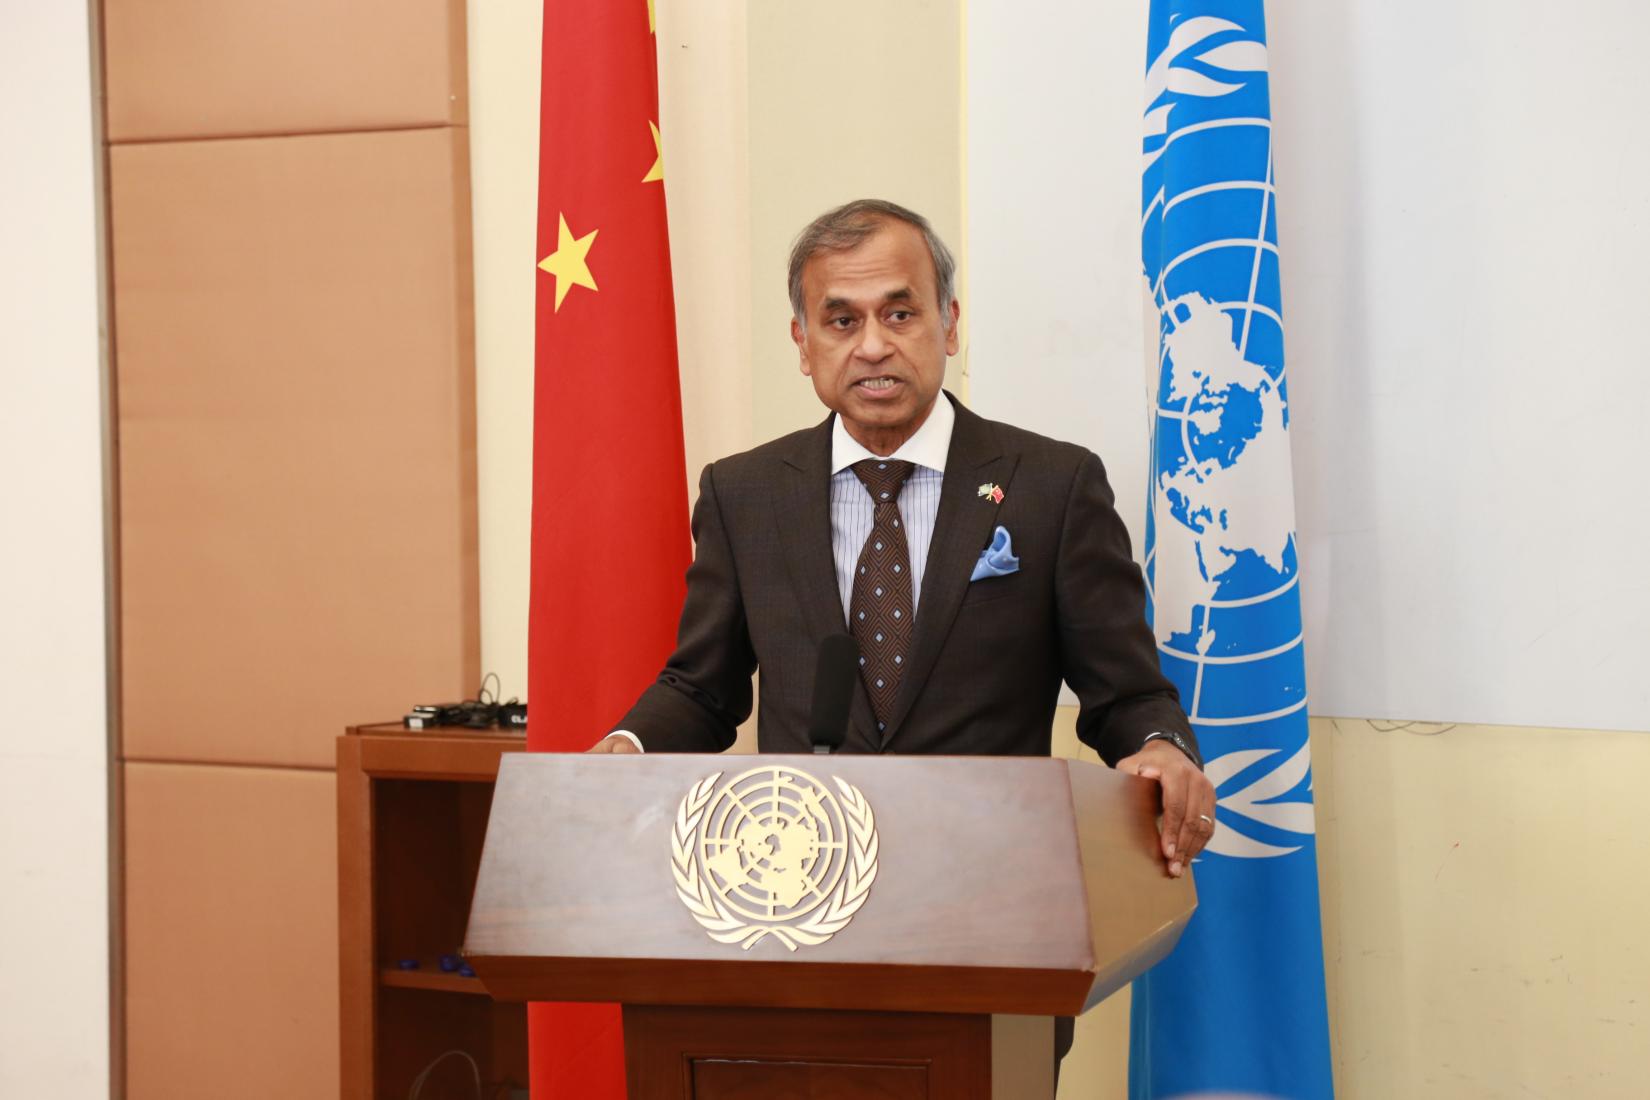 Siddharth Chatterjee, the UN Resident Coordinator in China